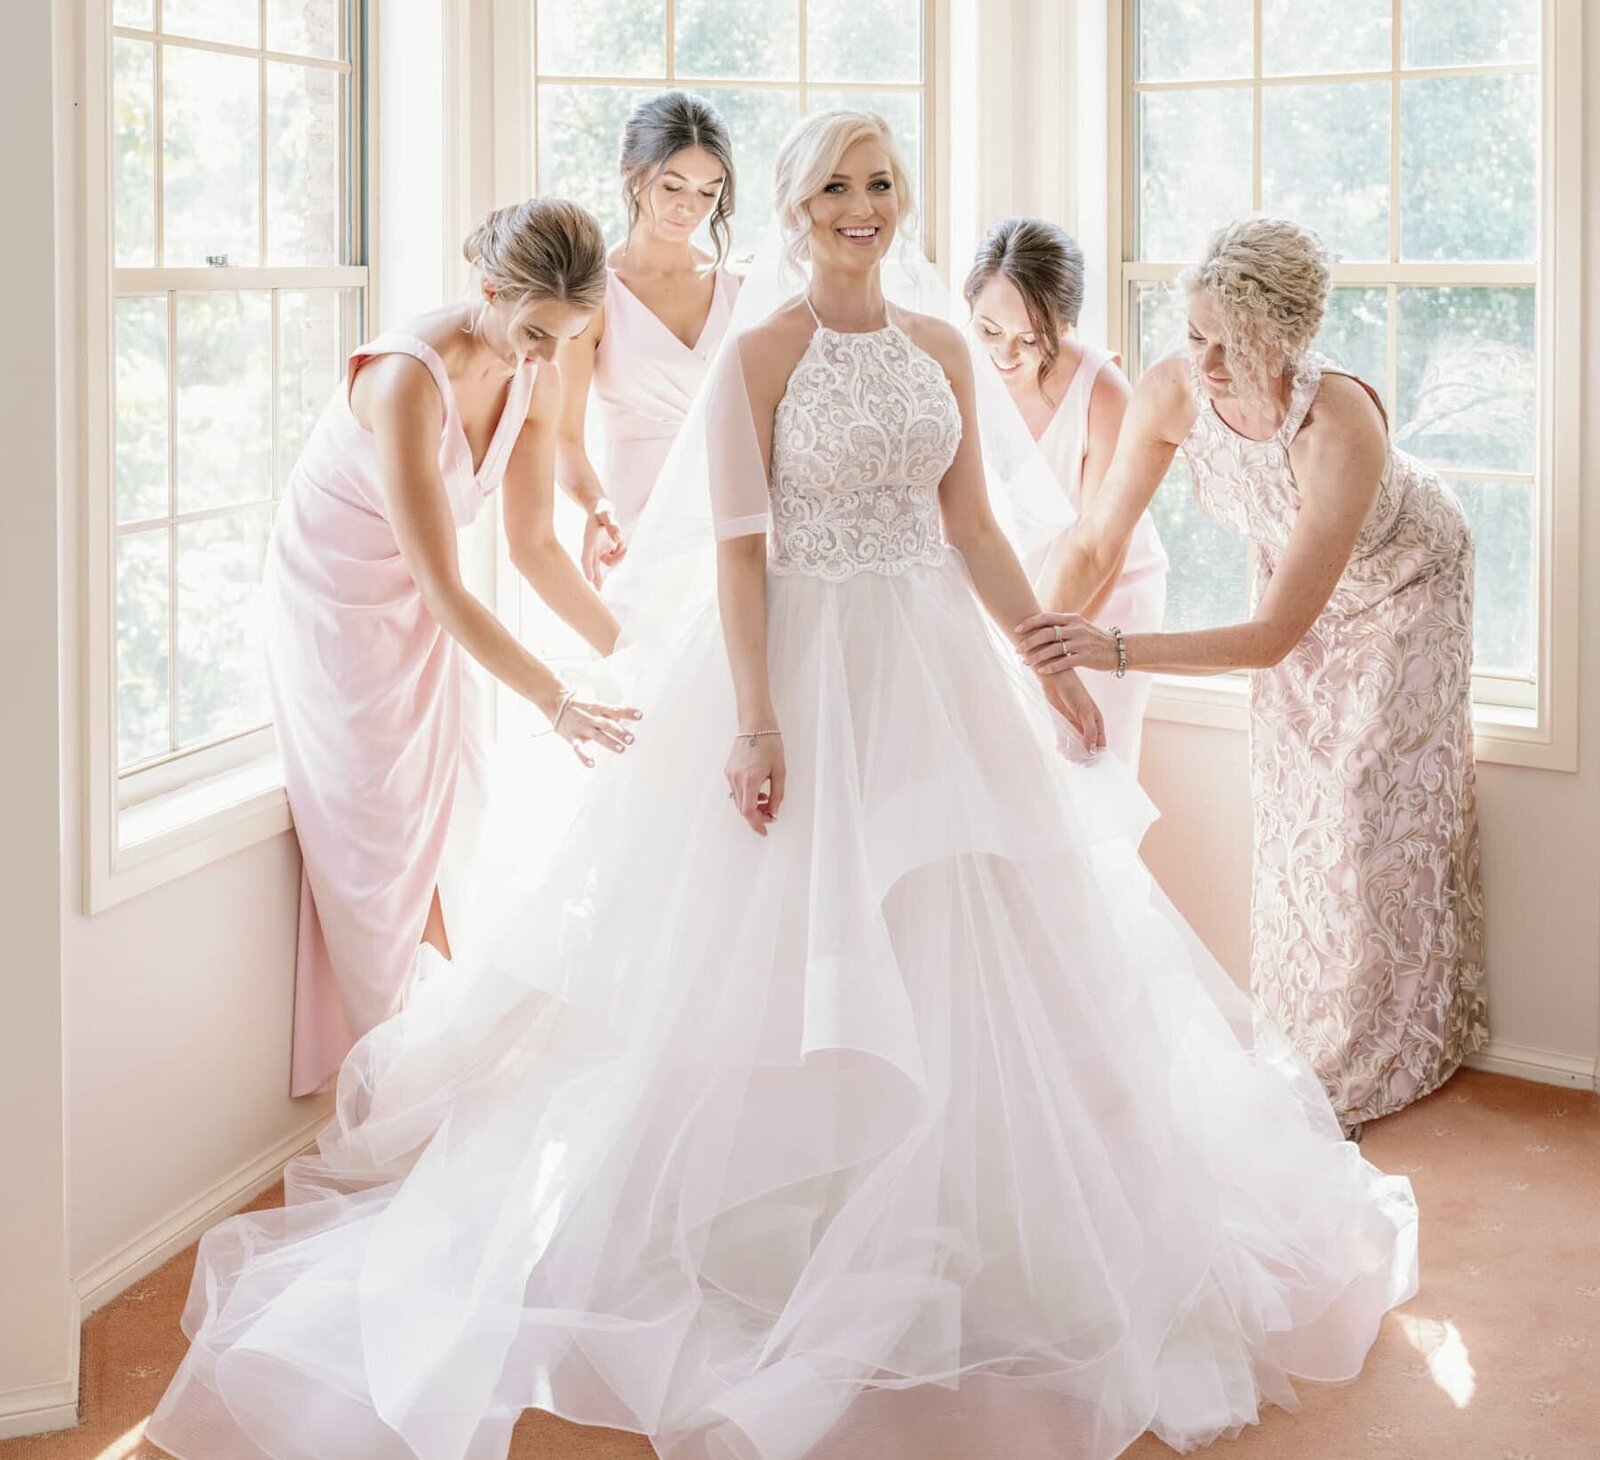 Bridesmaids are helping bride get dressed in her Oksana Mukha bridal gown